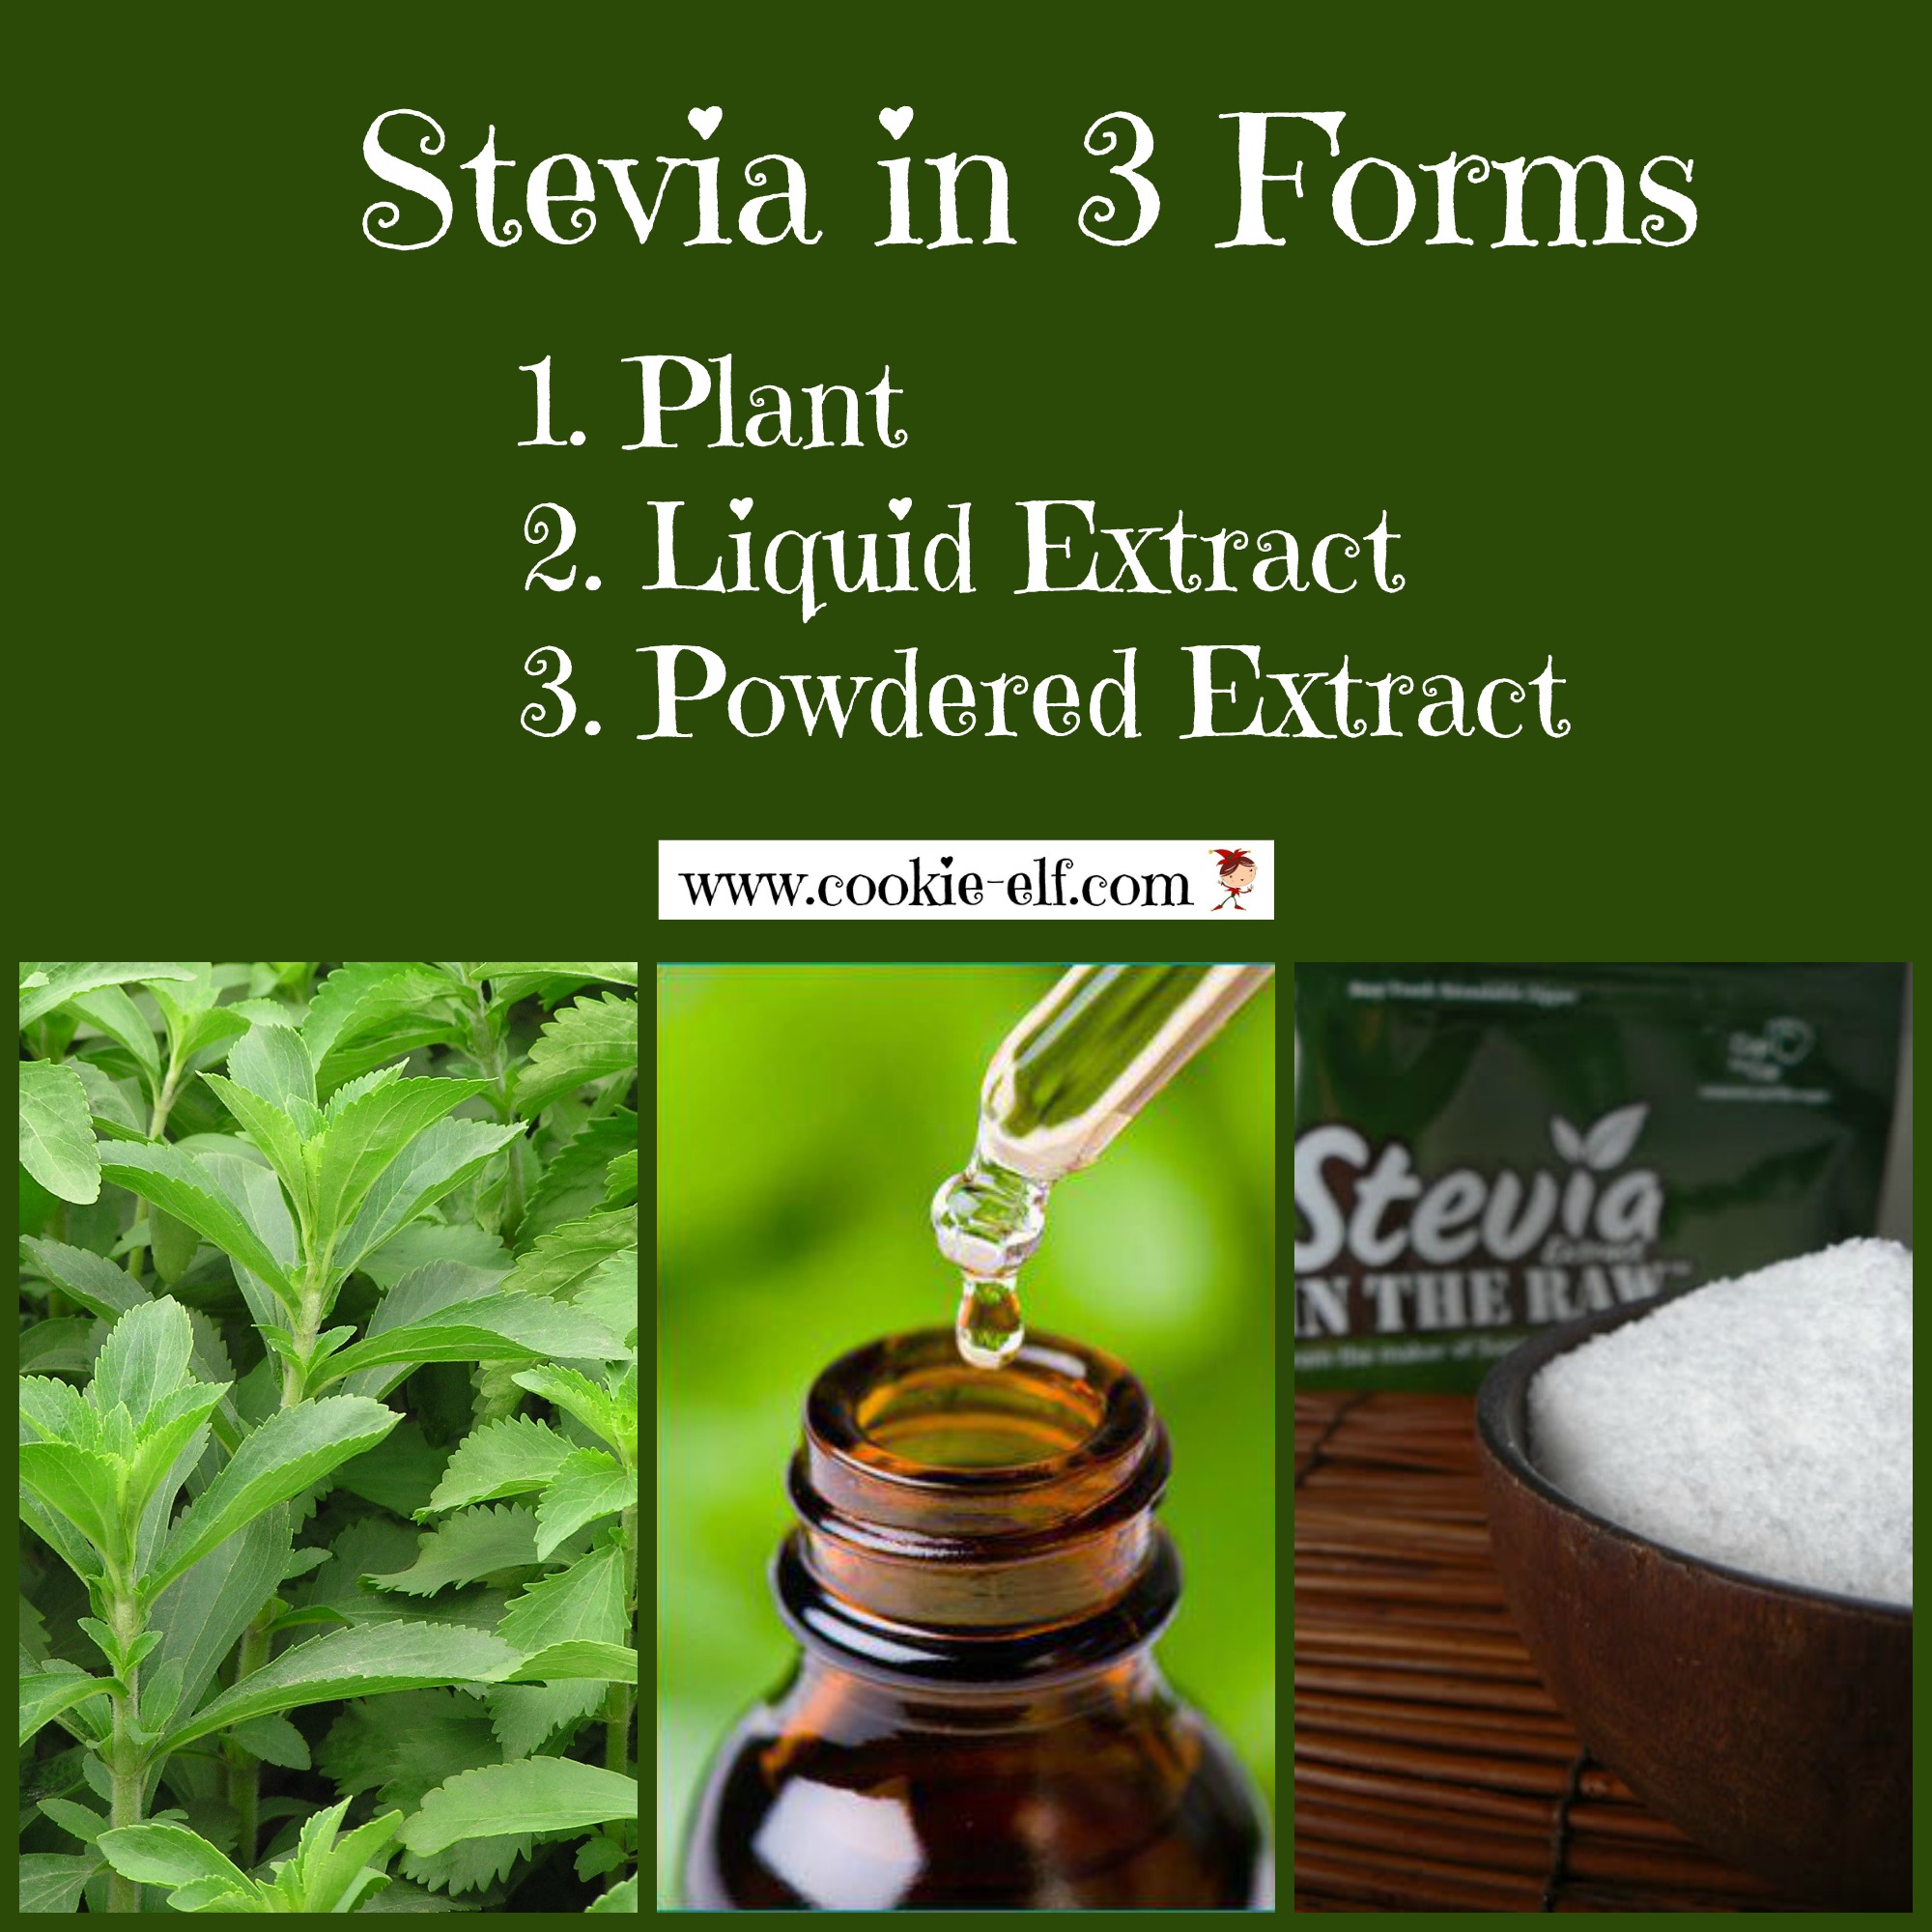 Stevia in 3 forms from The Cookie Elf